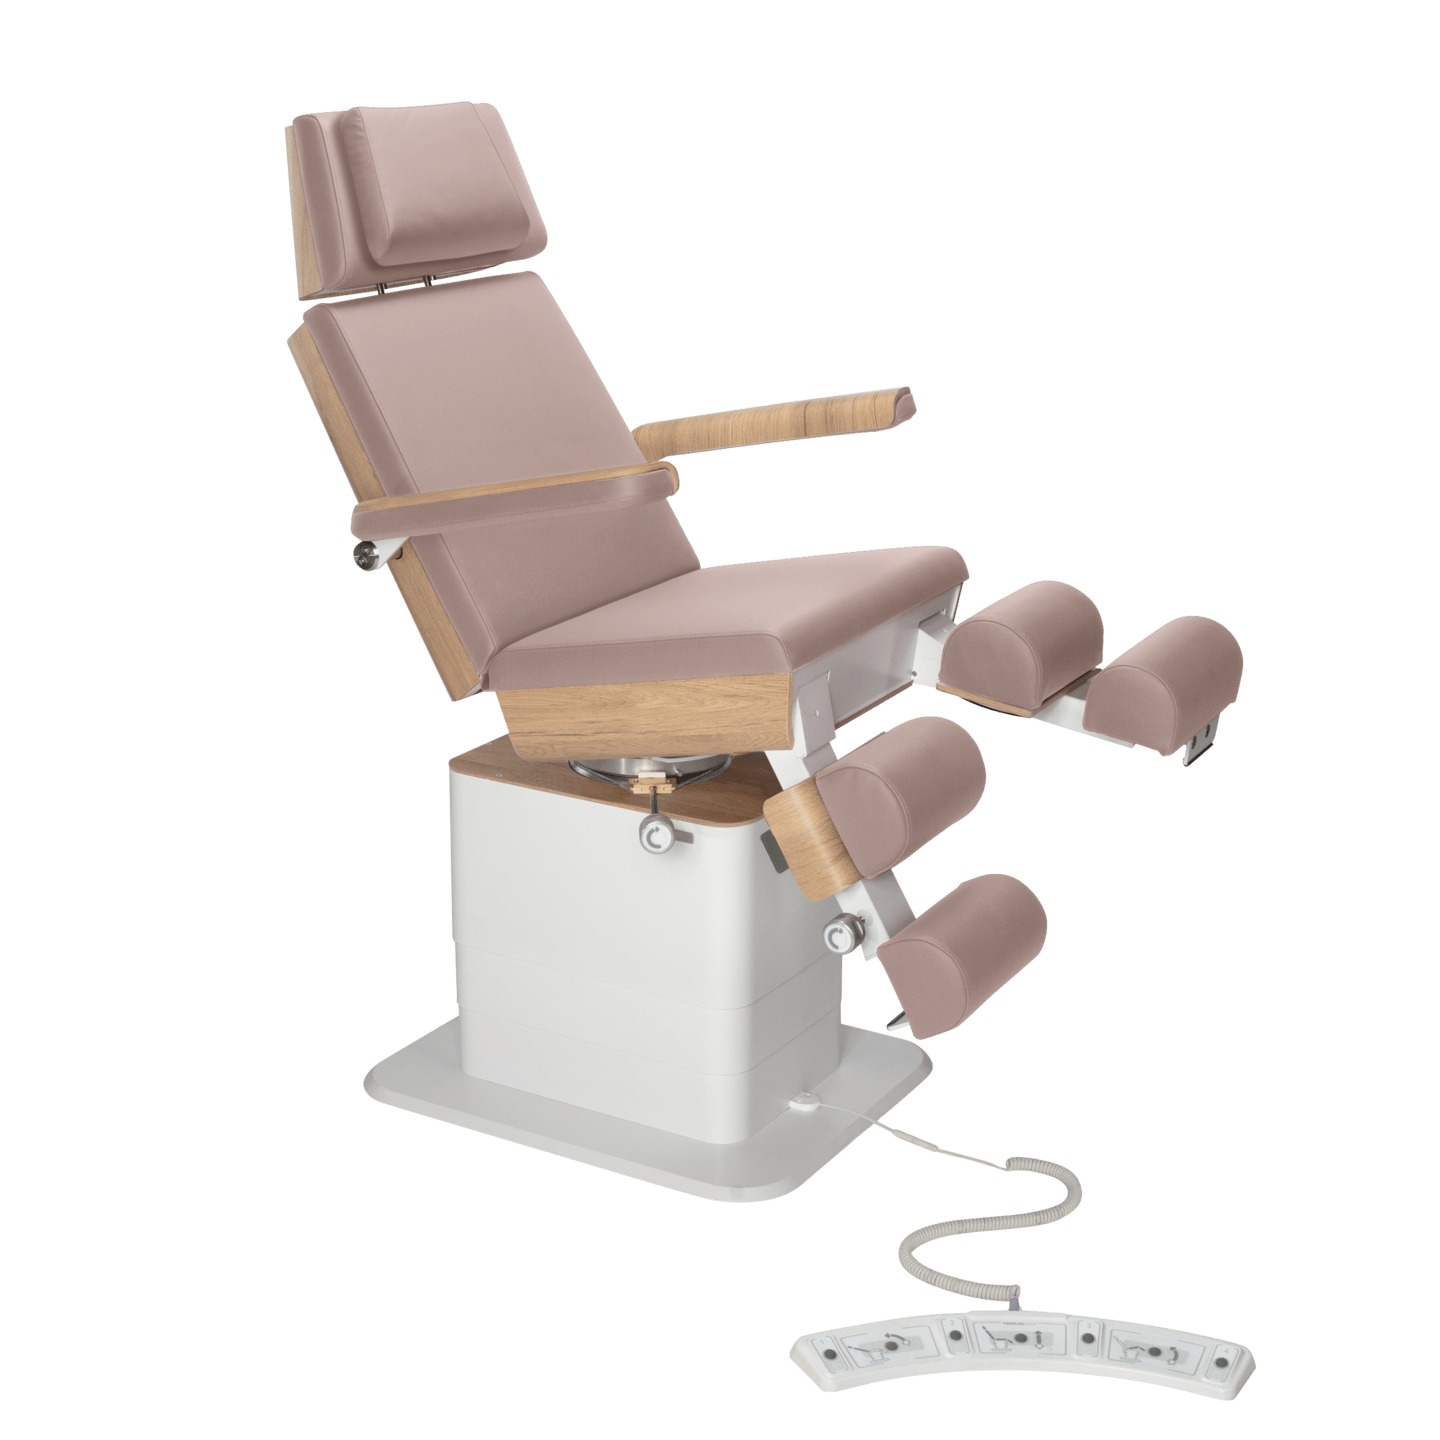 RUCK - MOON Podiatry Chair/Couch (with gas assisted leg sections) in taupe